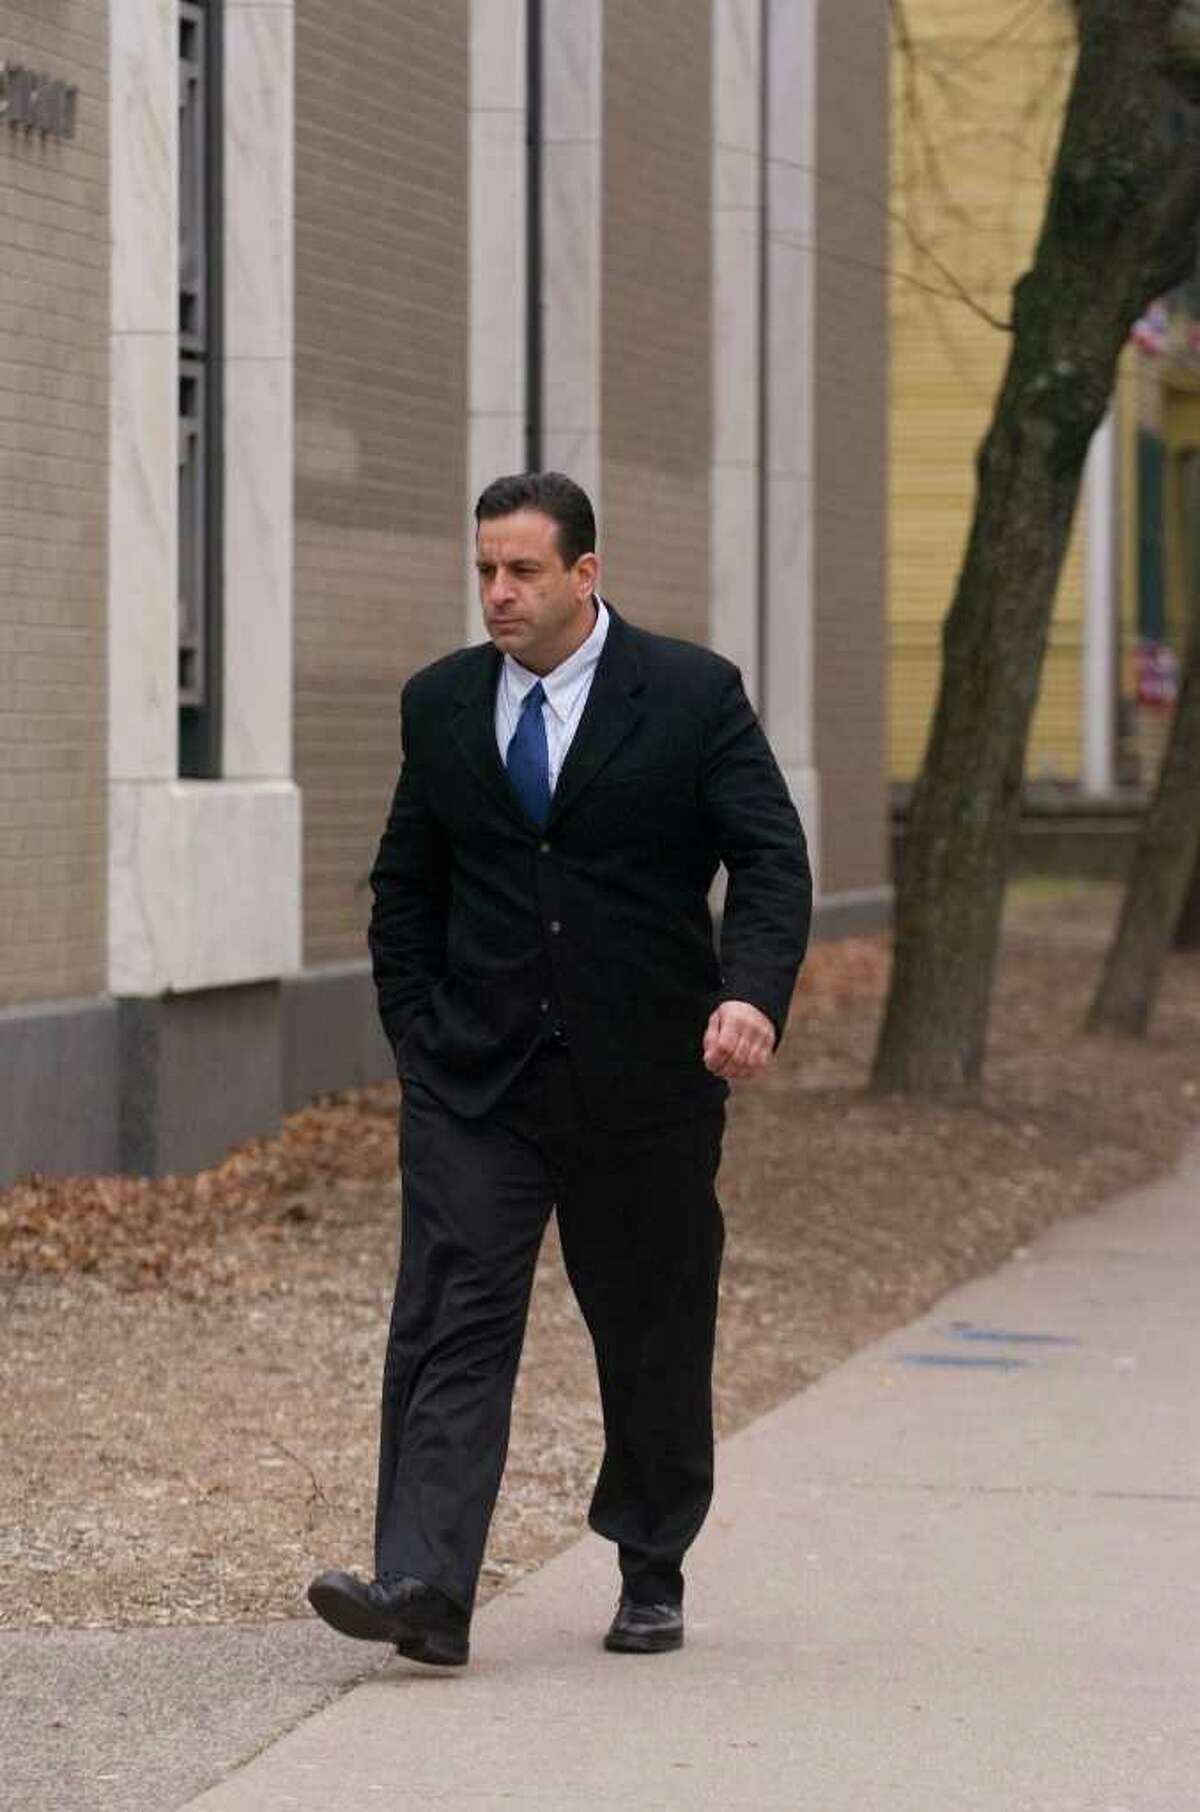 Mark Mansa walks to his hearing at the Abraham A. Ribicoff Federal Building and Courthouse in Hartford on Friday, Dec. 30, 2011. Mansa pleaded guilty to one count of conspiracy to distribute marijuana in excess of 100 kilograms between 2007 and 2011.